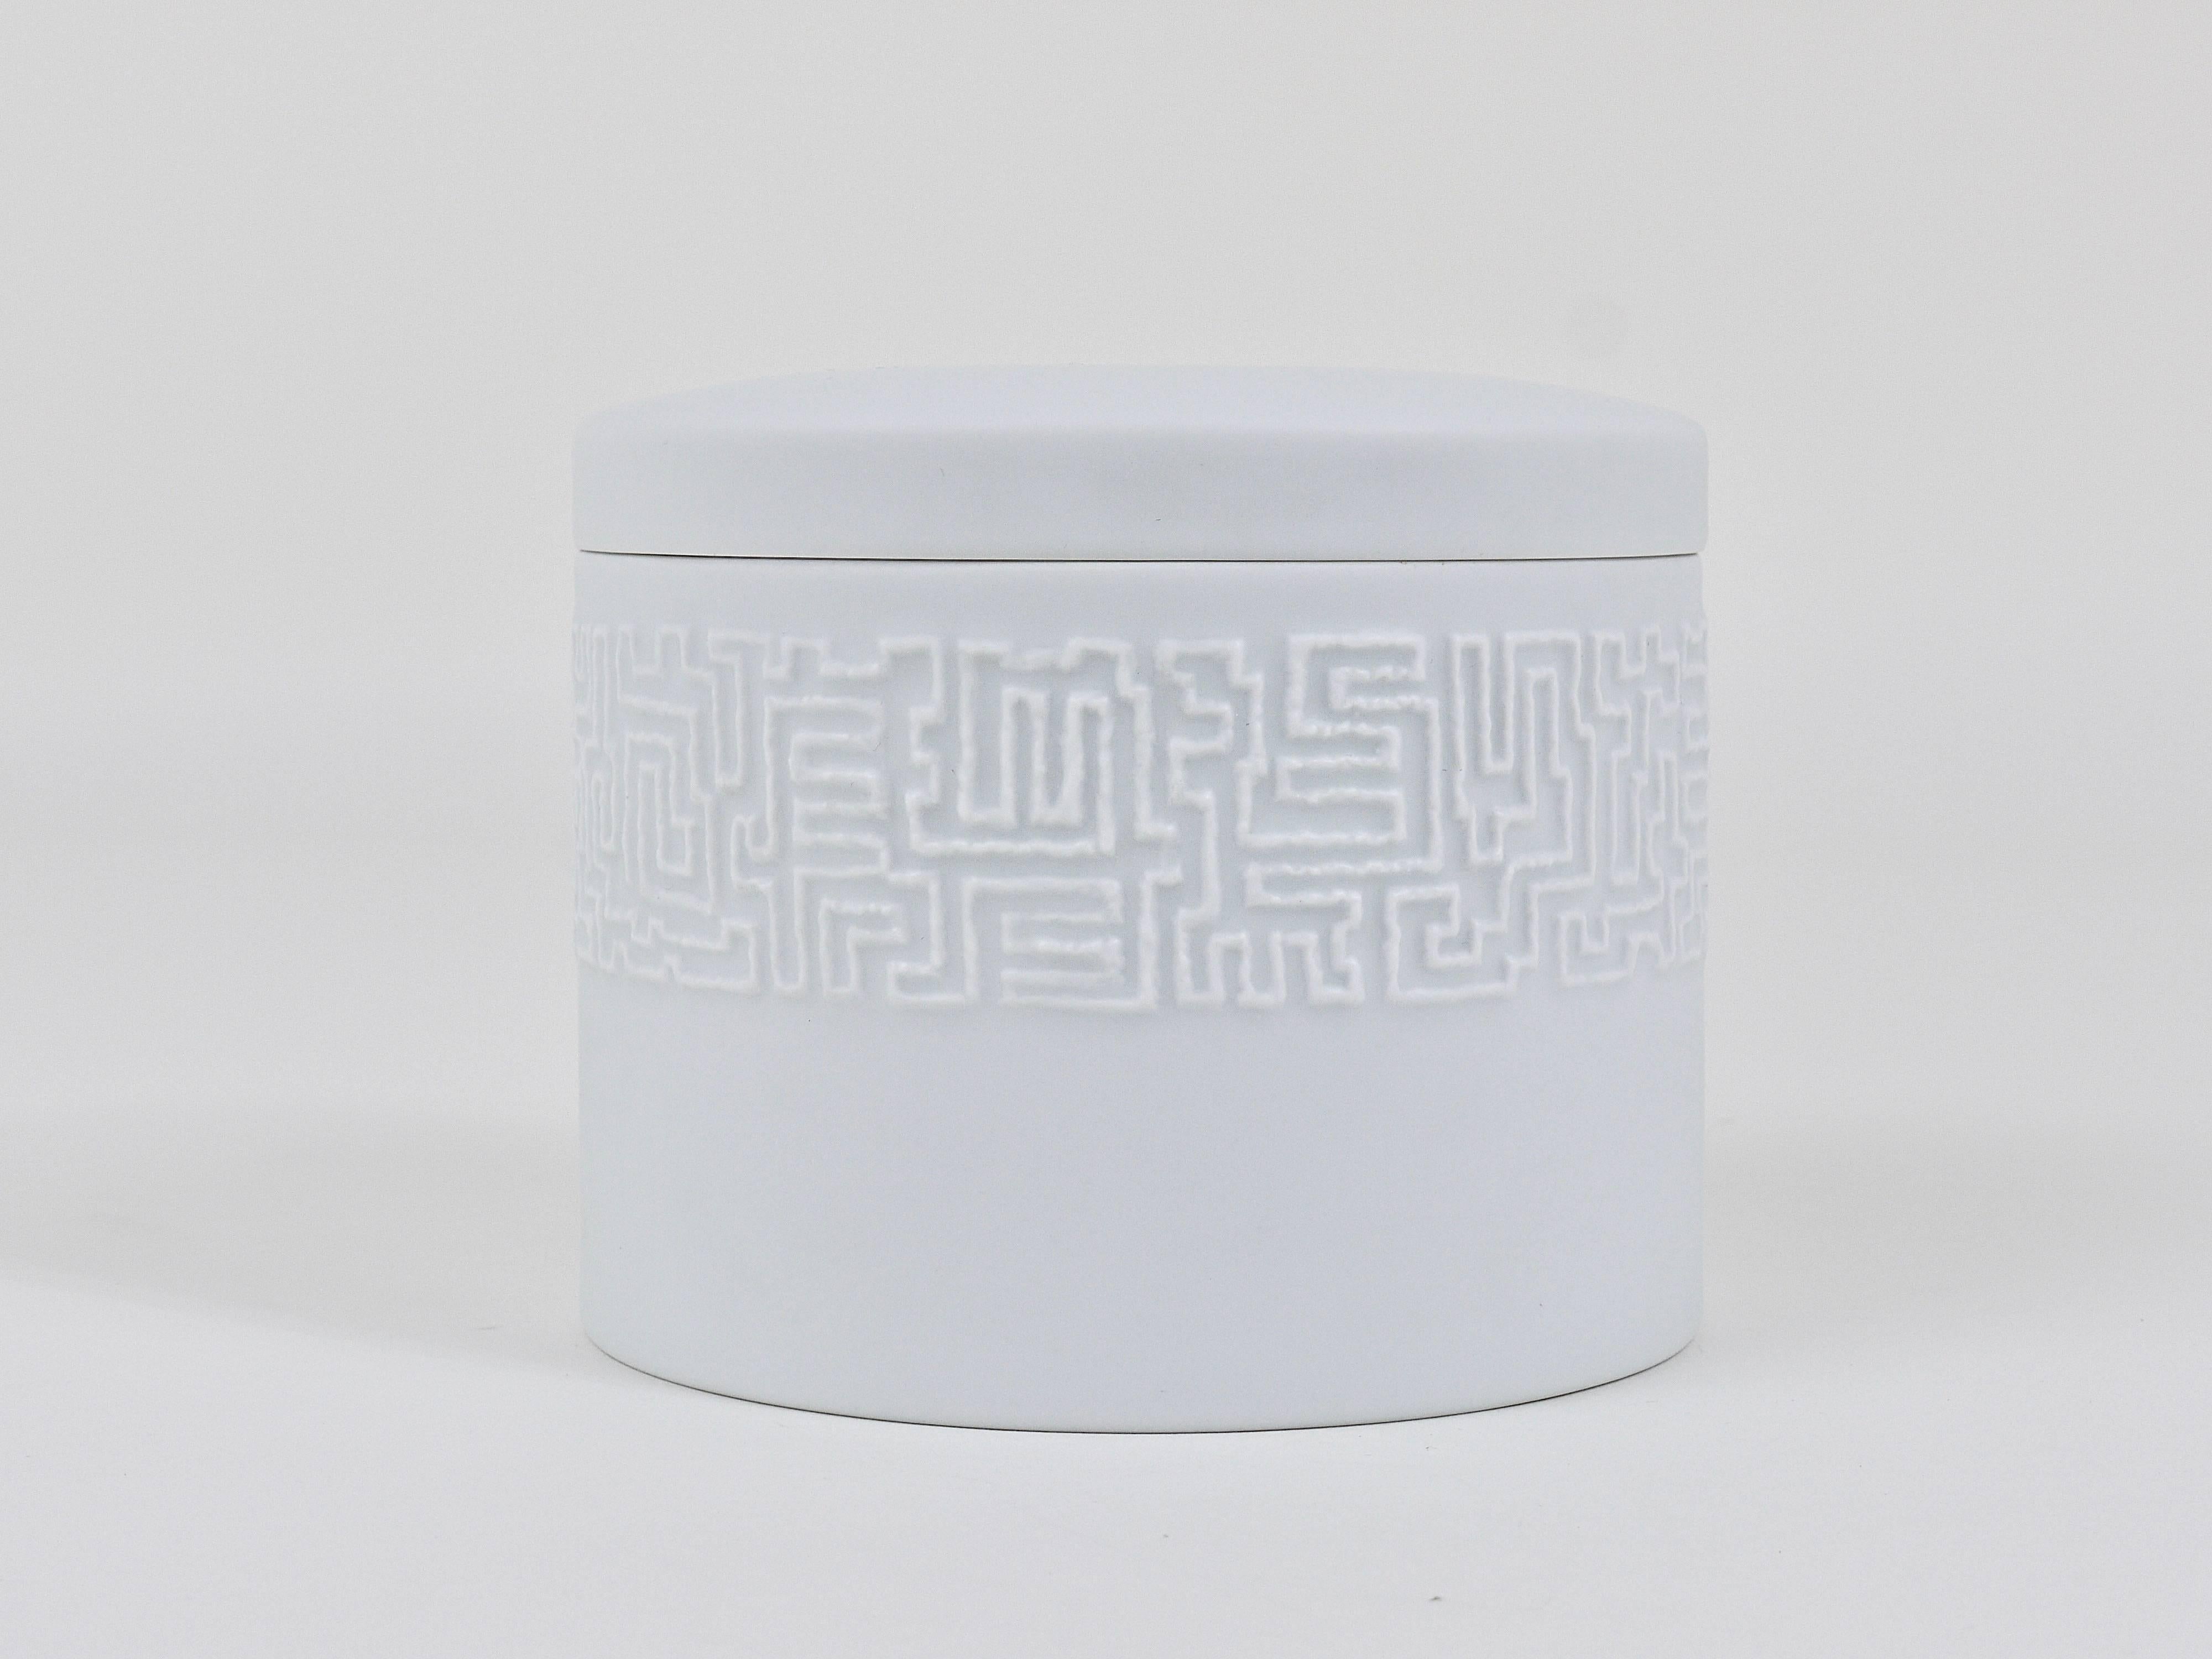 German White Relief Op Art Bowl with Lid, Cuno Fischer, Rosenthal Studio-Linie, 1960s For Sale